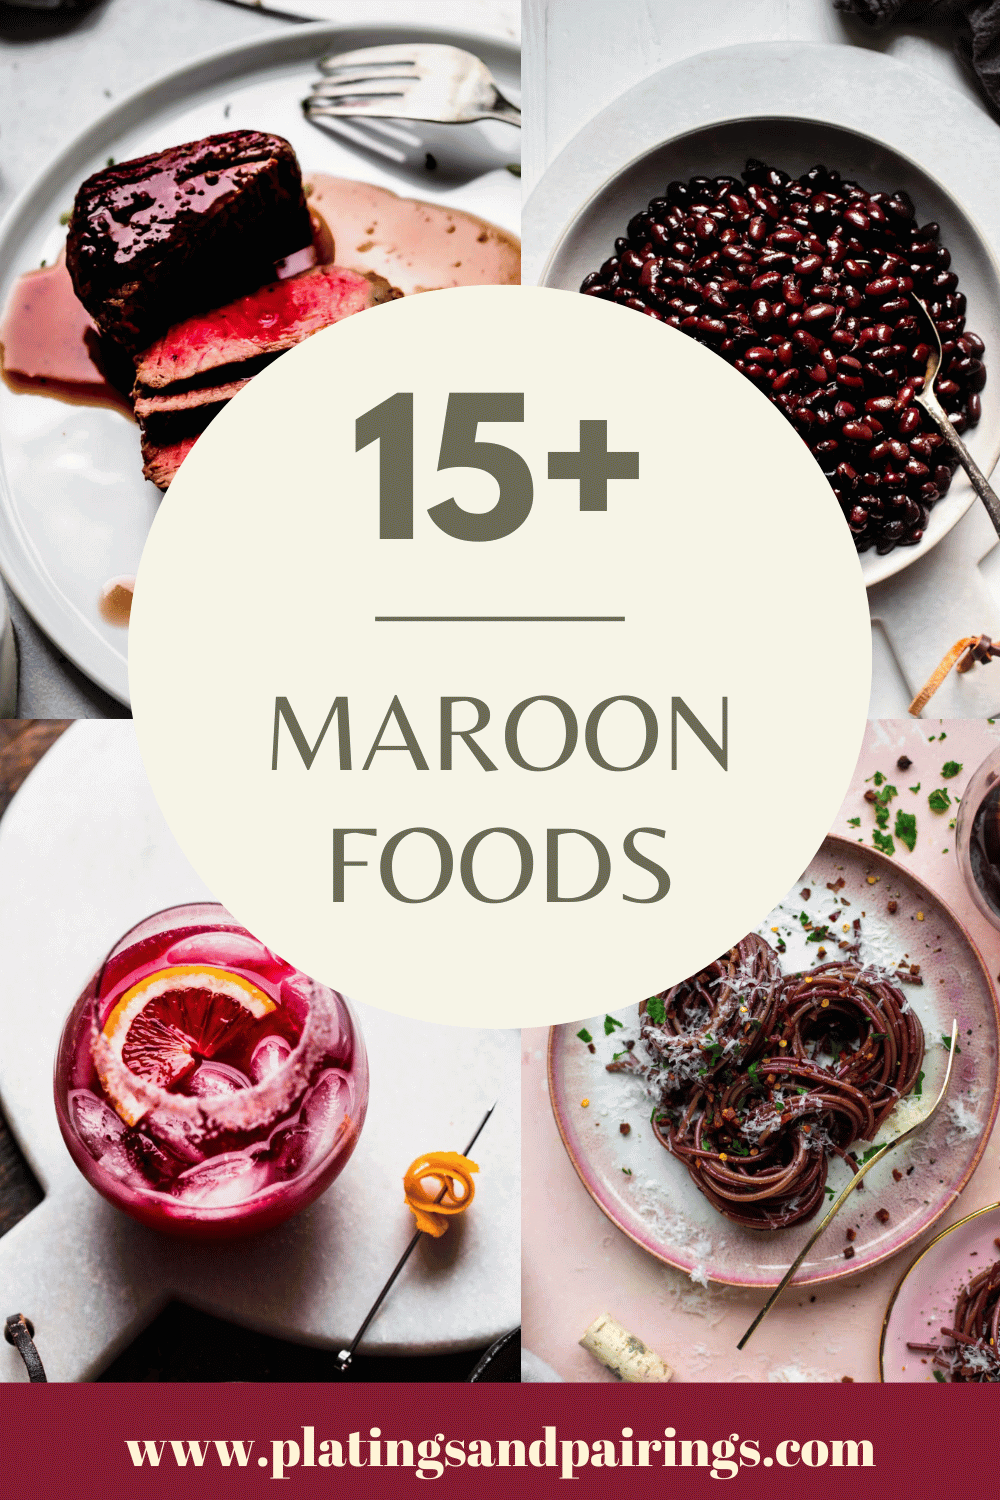 Collage of maroon foods with text overlay.